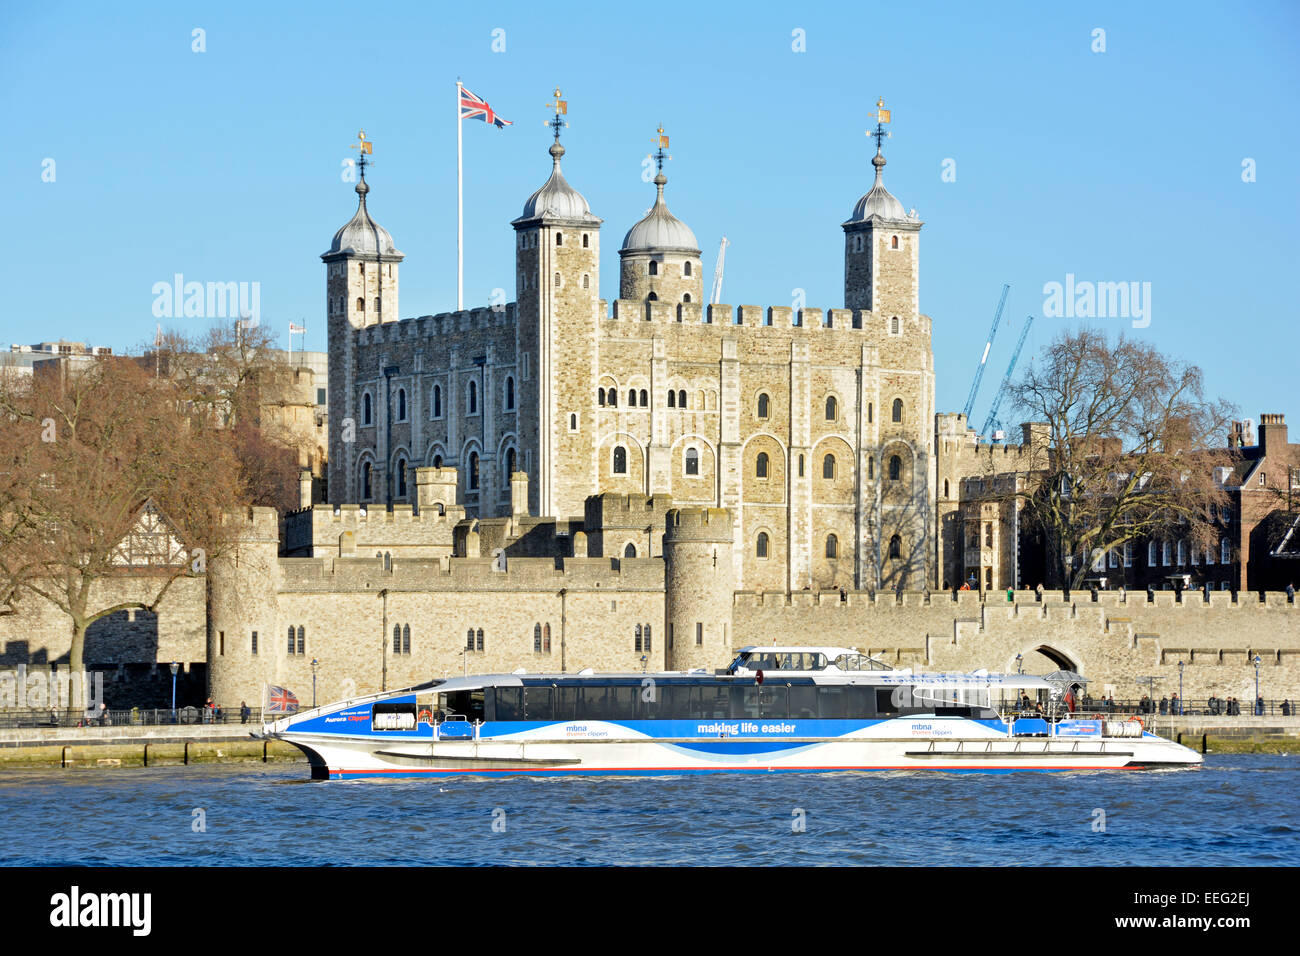 Thames clipper high speed catamaran commuter and tourist river bus service passing the Tower of London England UK Stock Photo